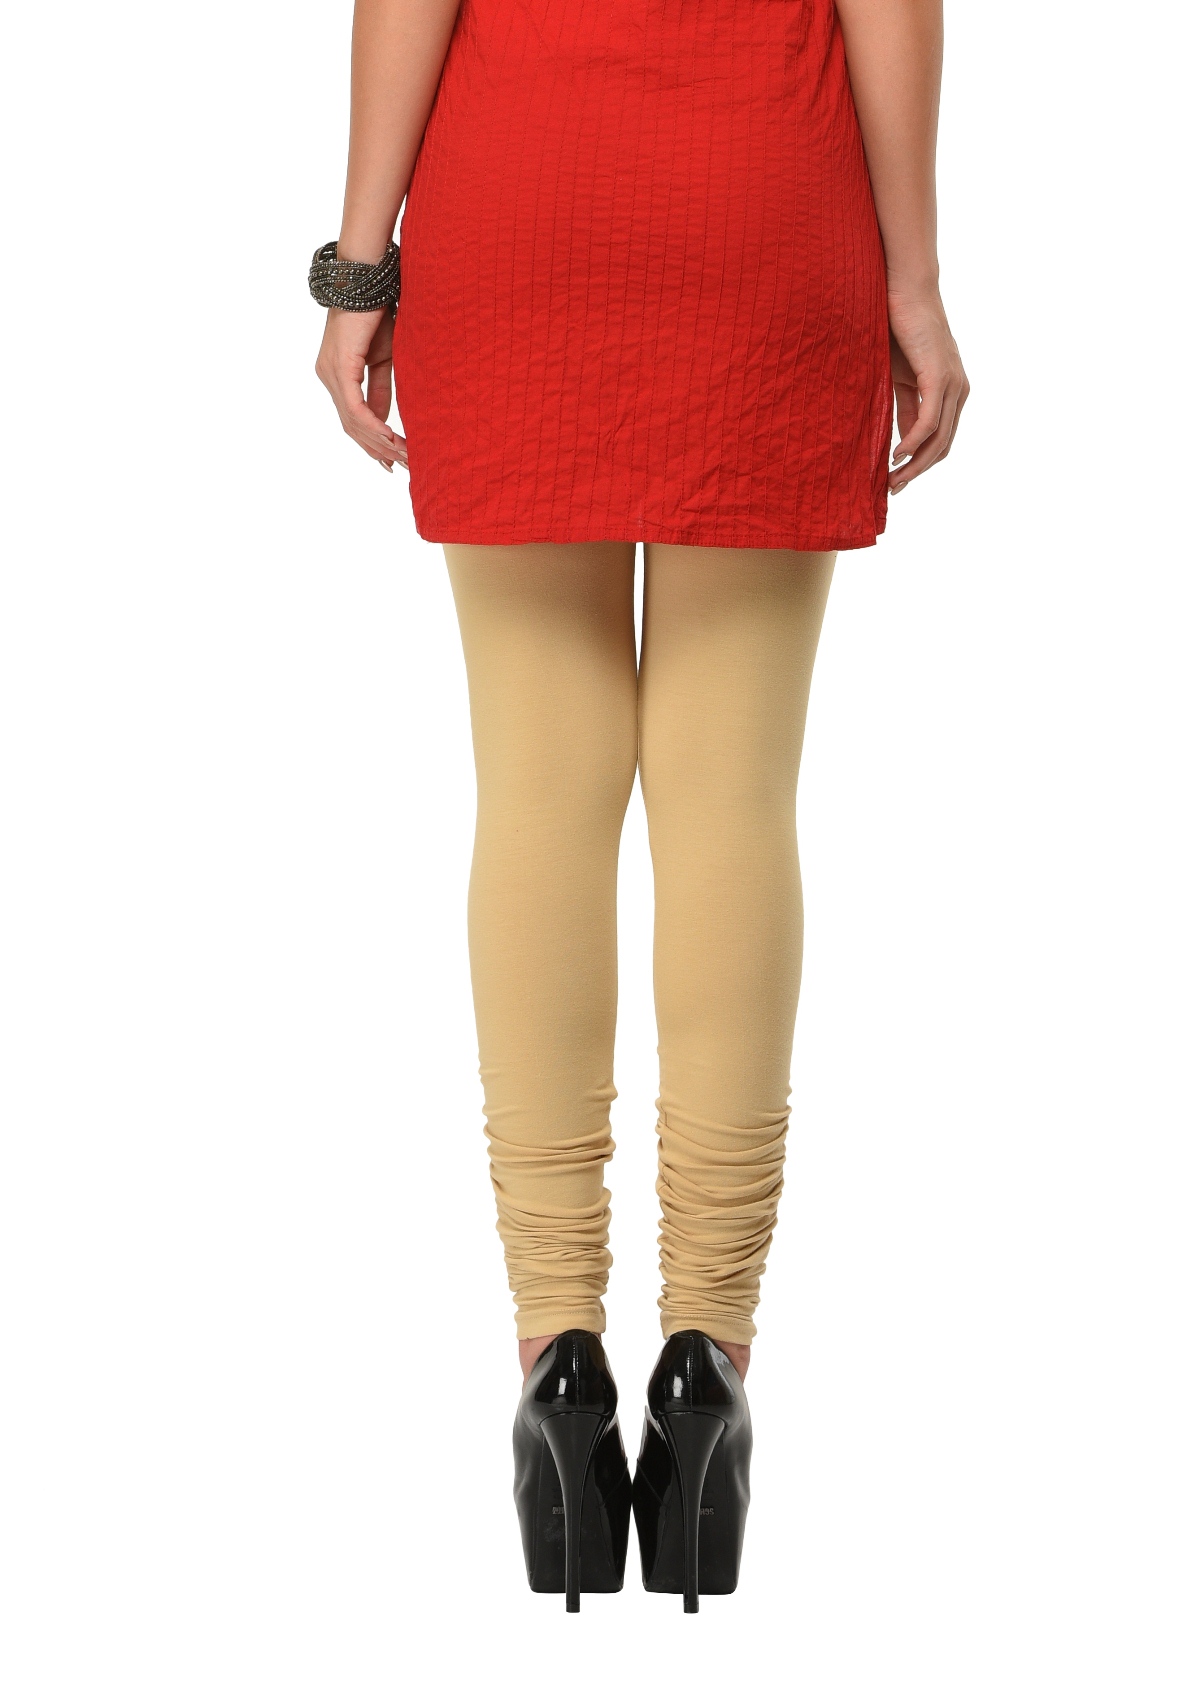 Frenchtrendz  Buy Frenchtrendz Cotton Spandex Light Coral Ankle Leggings  Online India